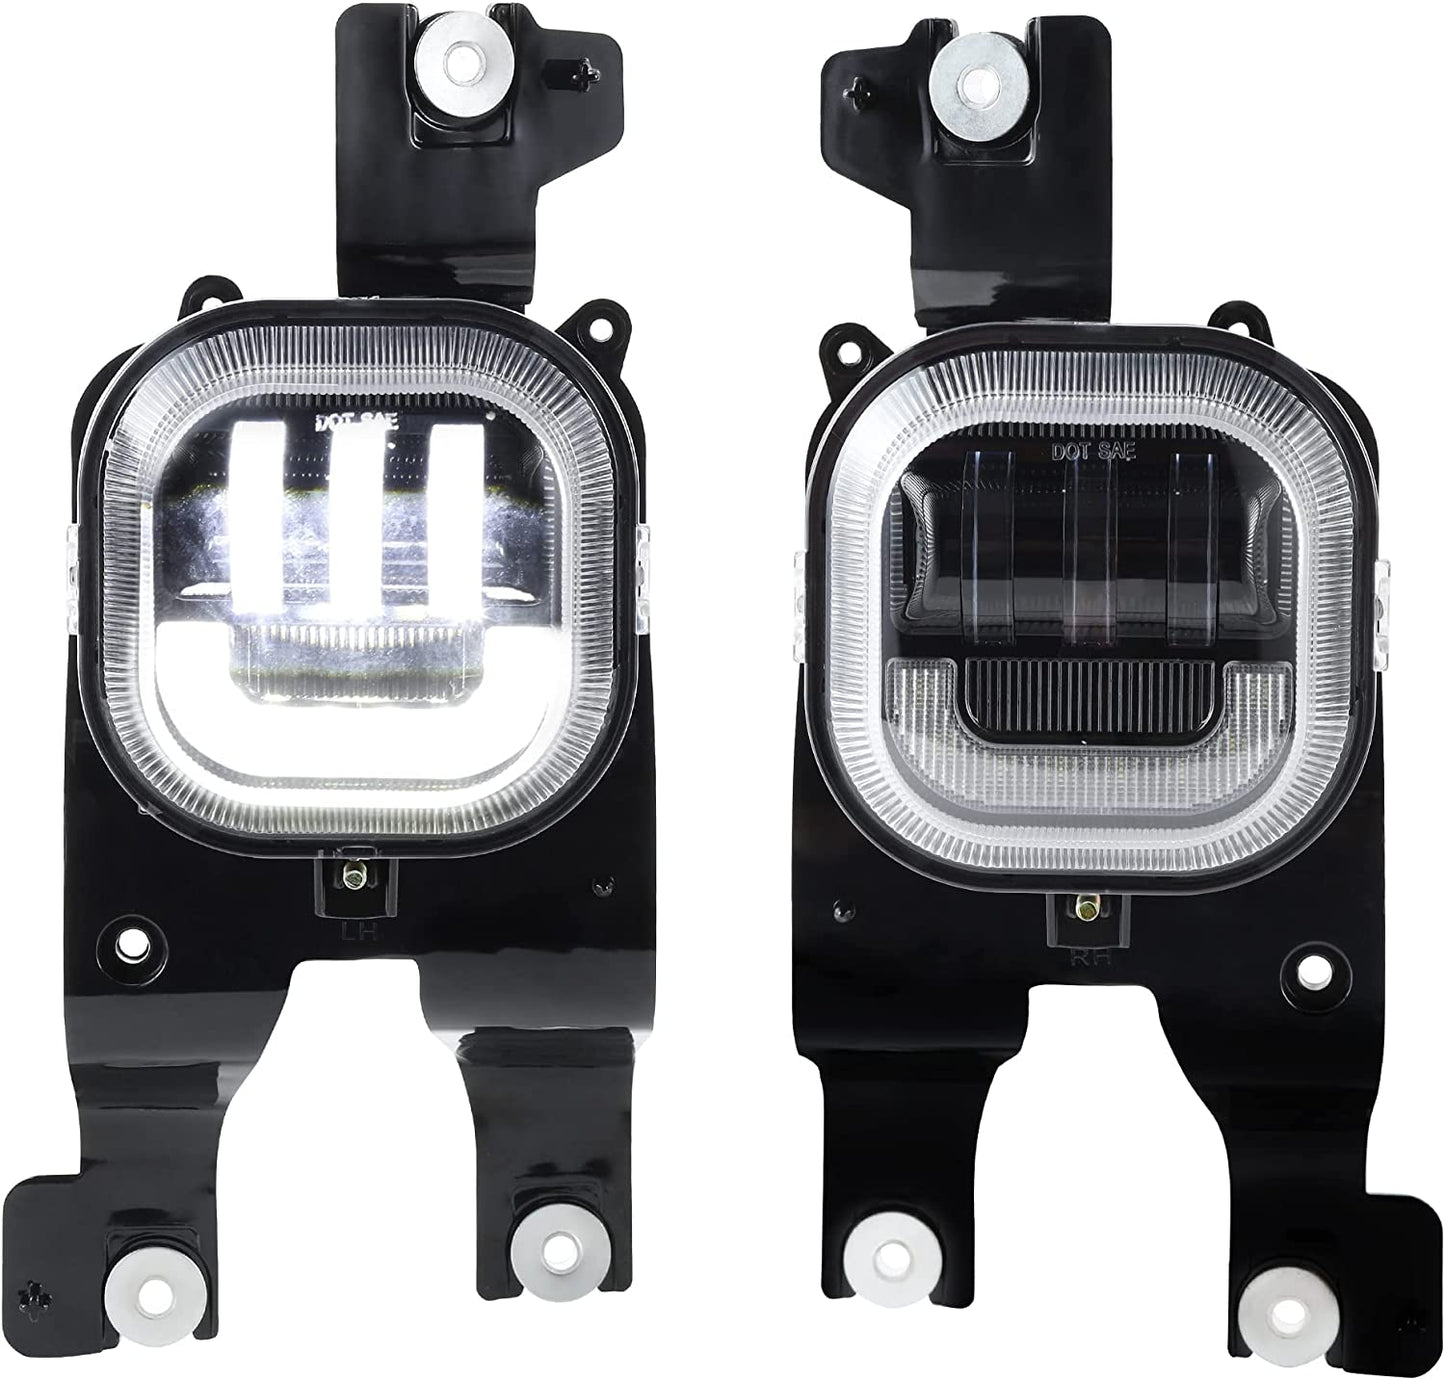 New updated LED Fog Lights W/DRL for 2008 2009 2010 FORD F250 F350 F450